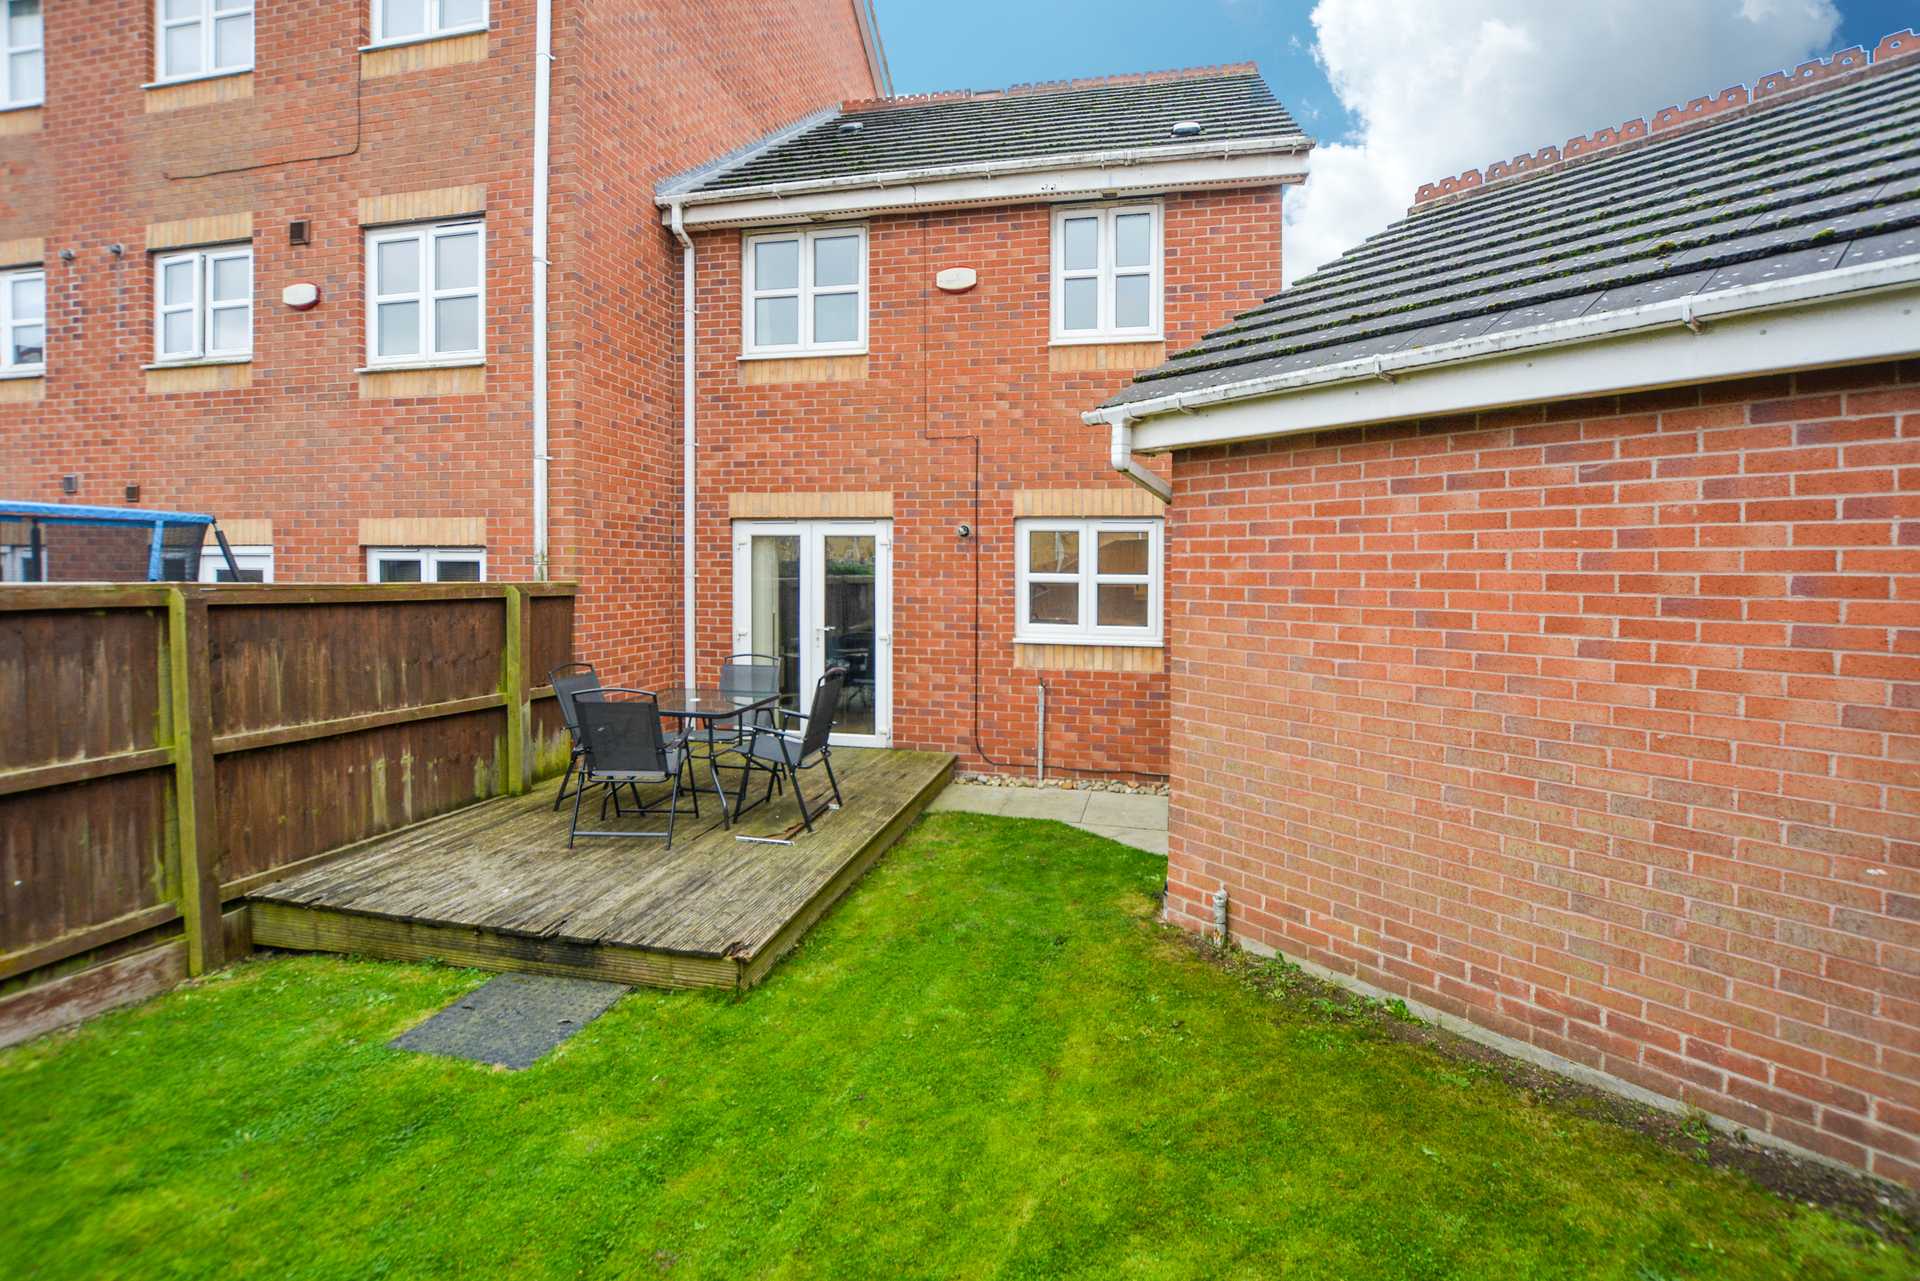 House in Braunstone, Leicestershire 10050414